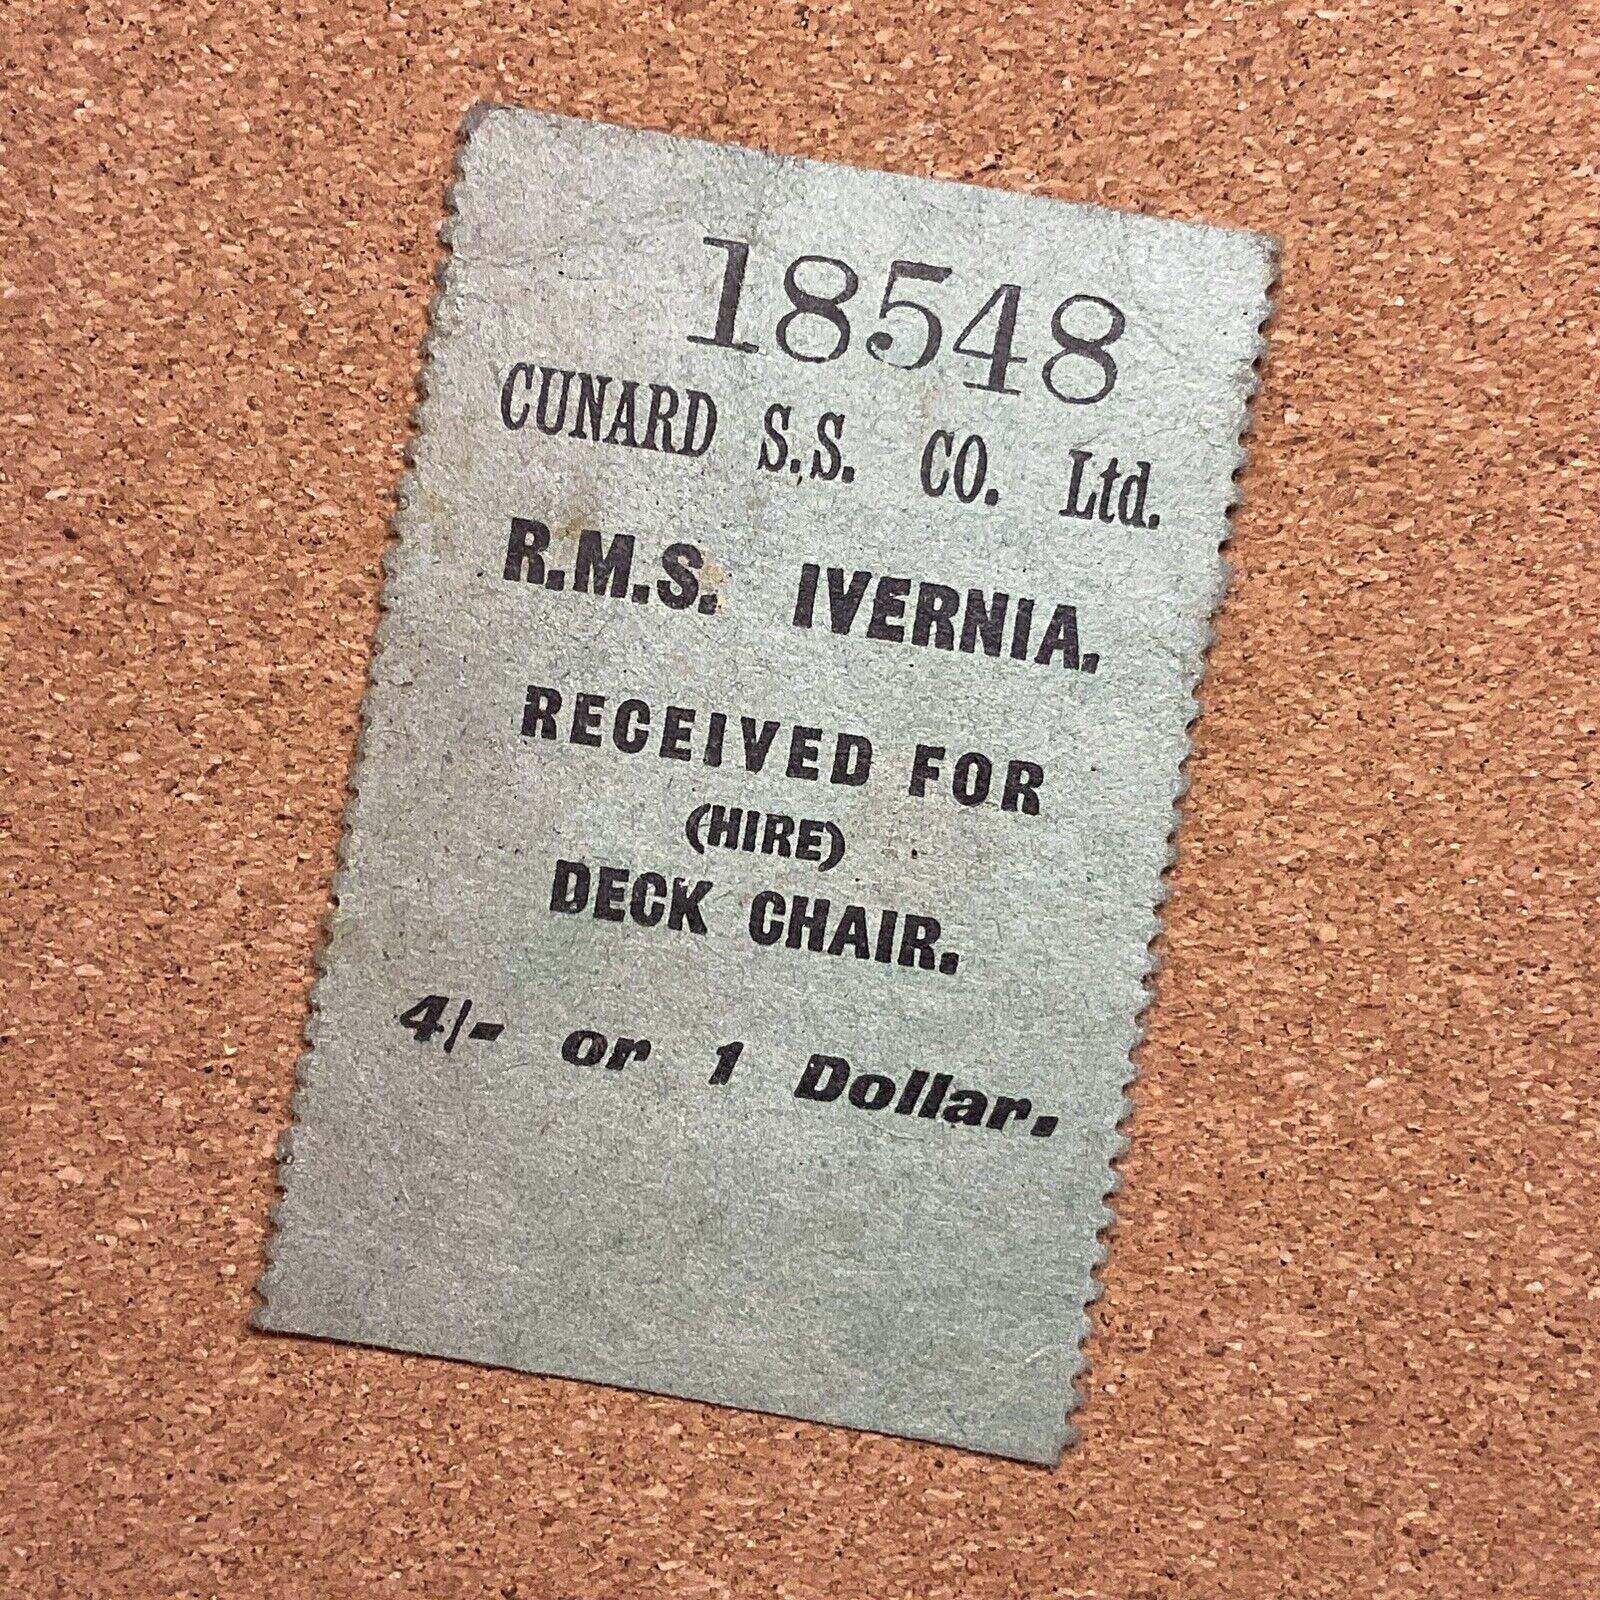 RMS IVERNIA Cunard Lines Deck Chair Ticket. 1950’s Vintage Antique Cruise Ship